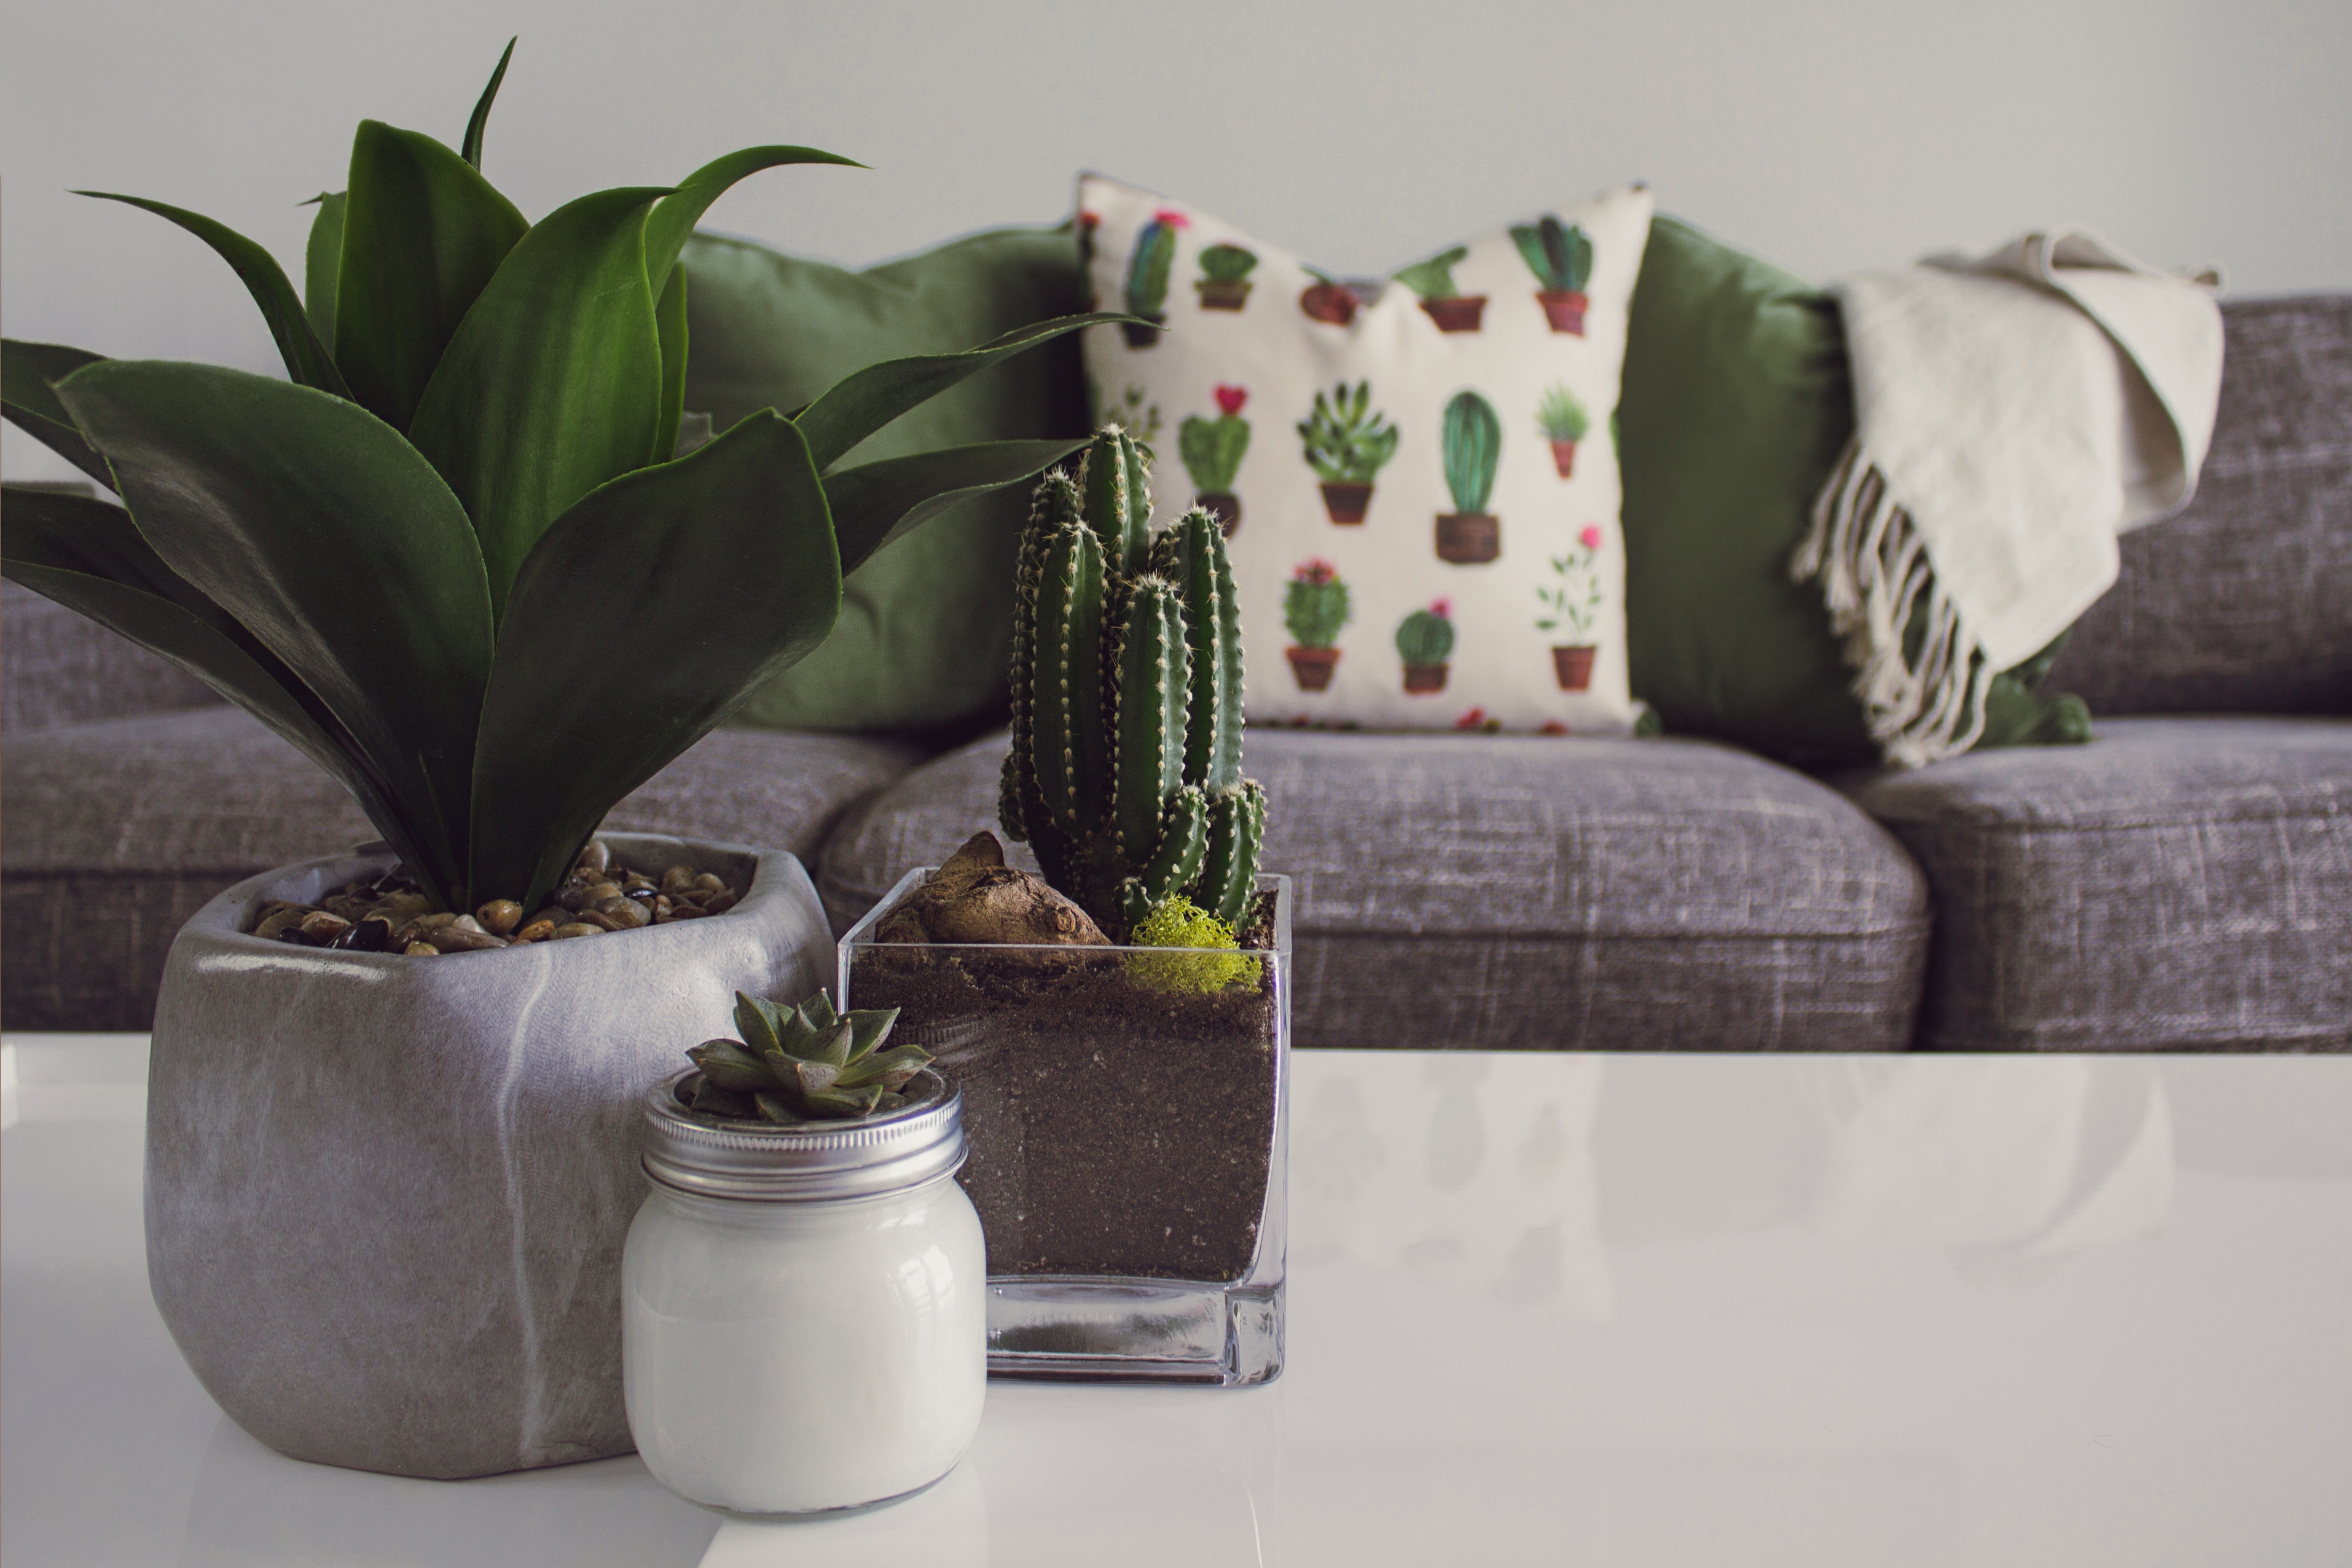 Incorporating succulents and blooming cacti will play nicely off of the natural fabrics in neutral tones.